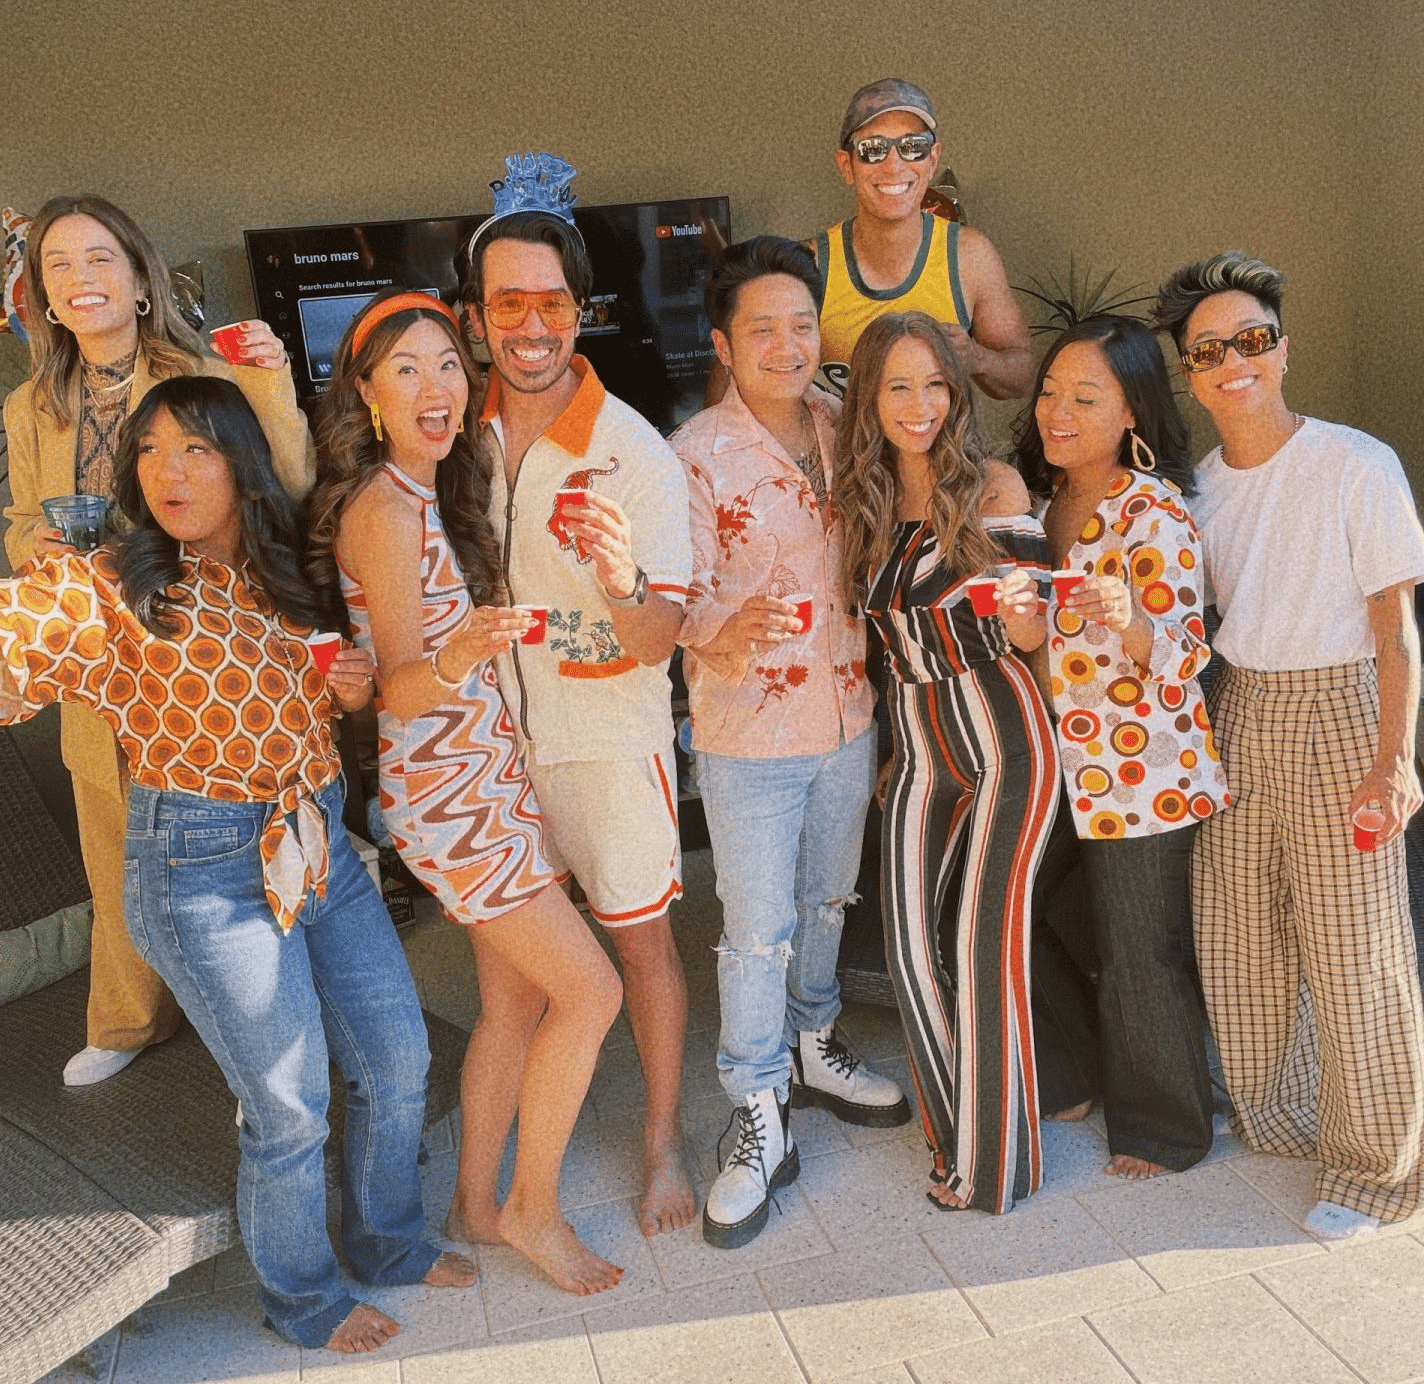 Party guests in 70s theme party attire